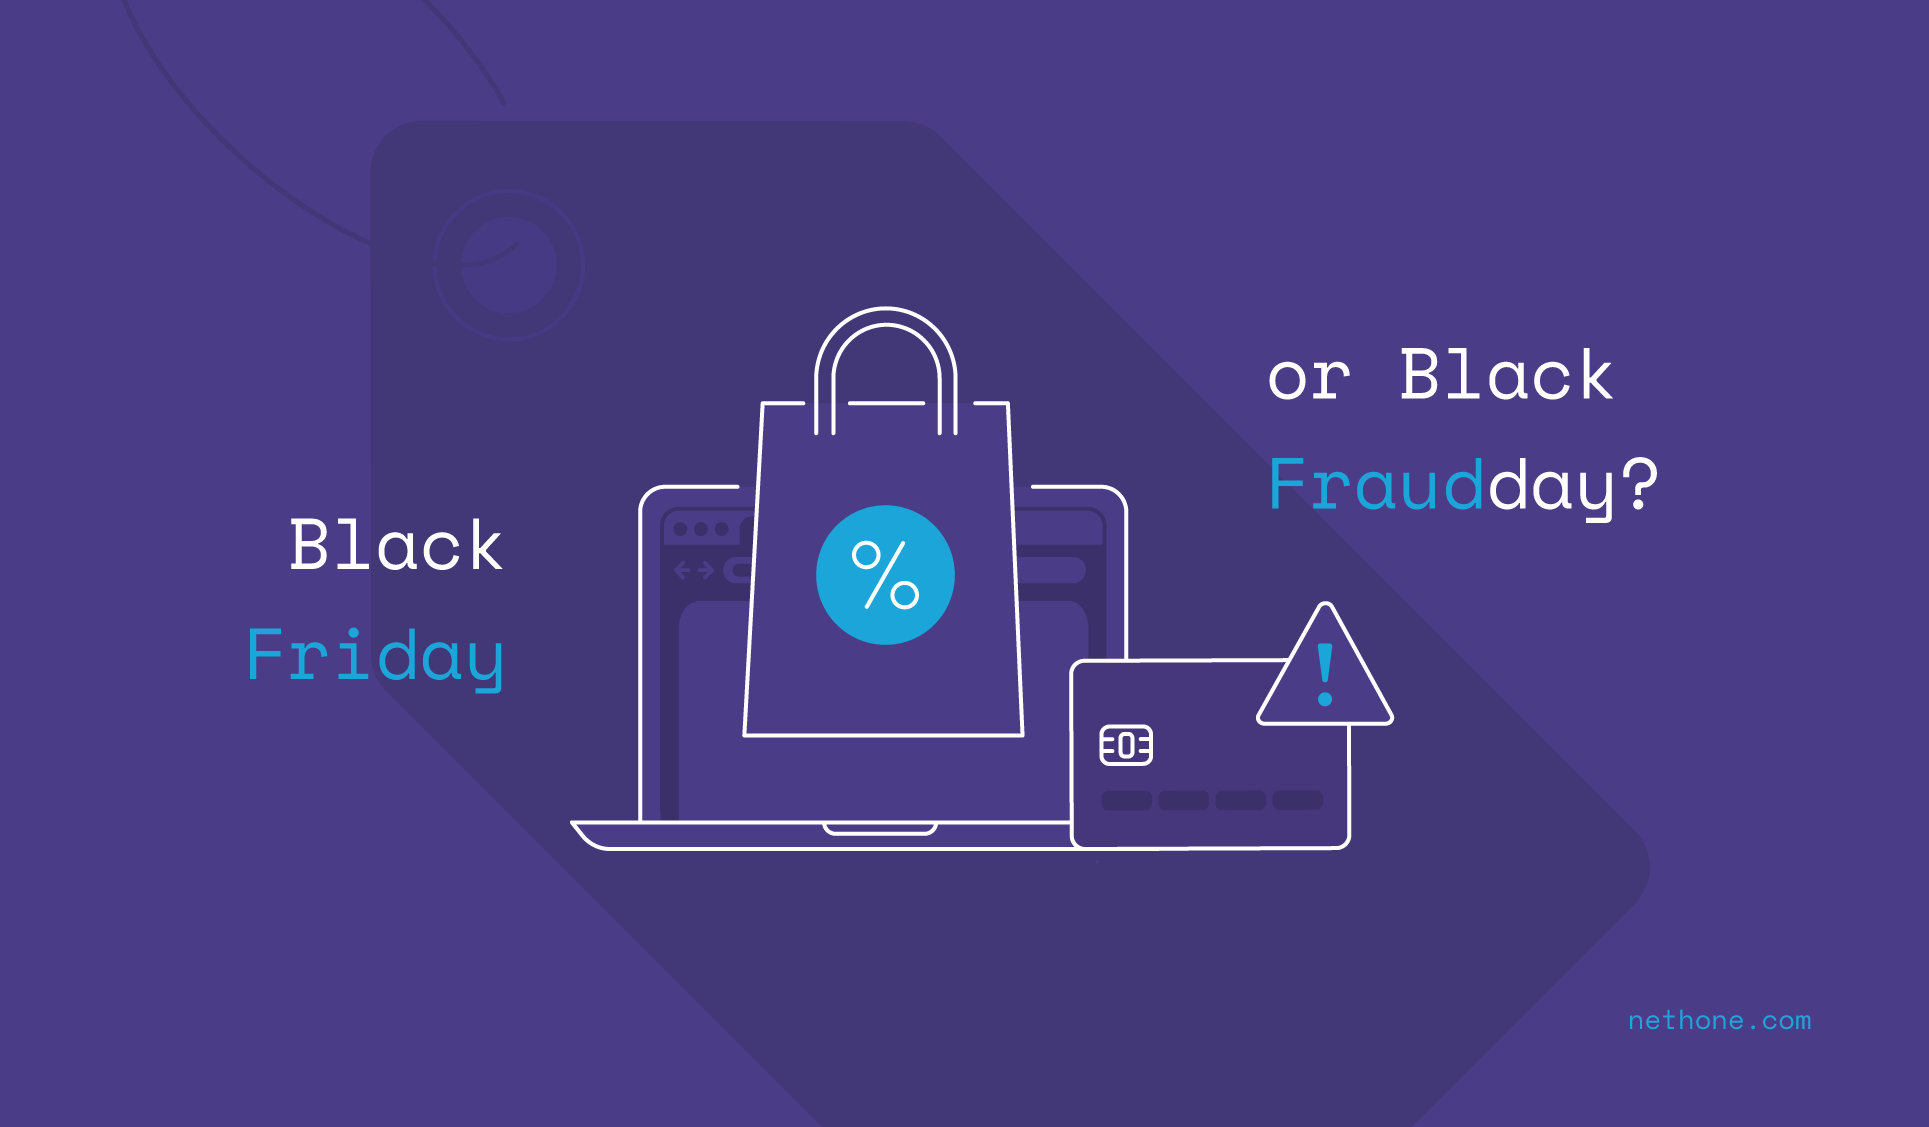 Black Friday sales scams and securing your business during the holiday season